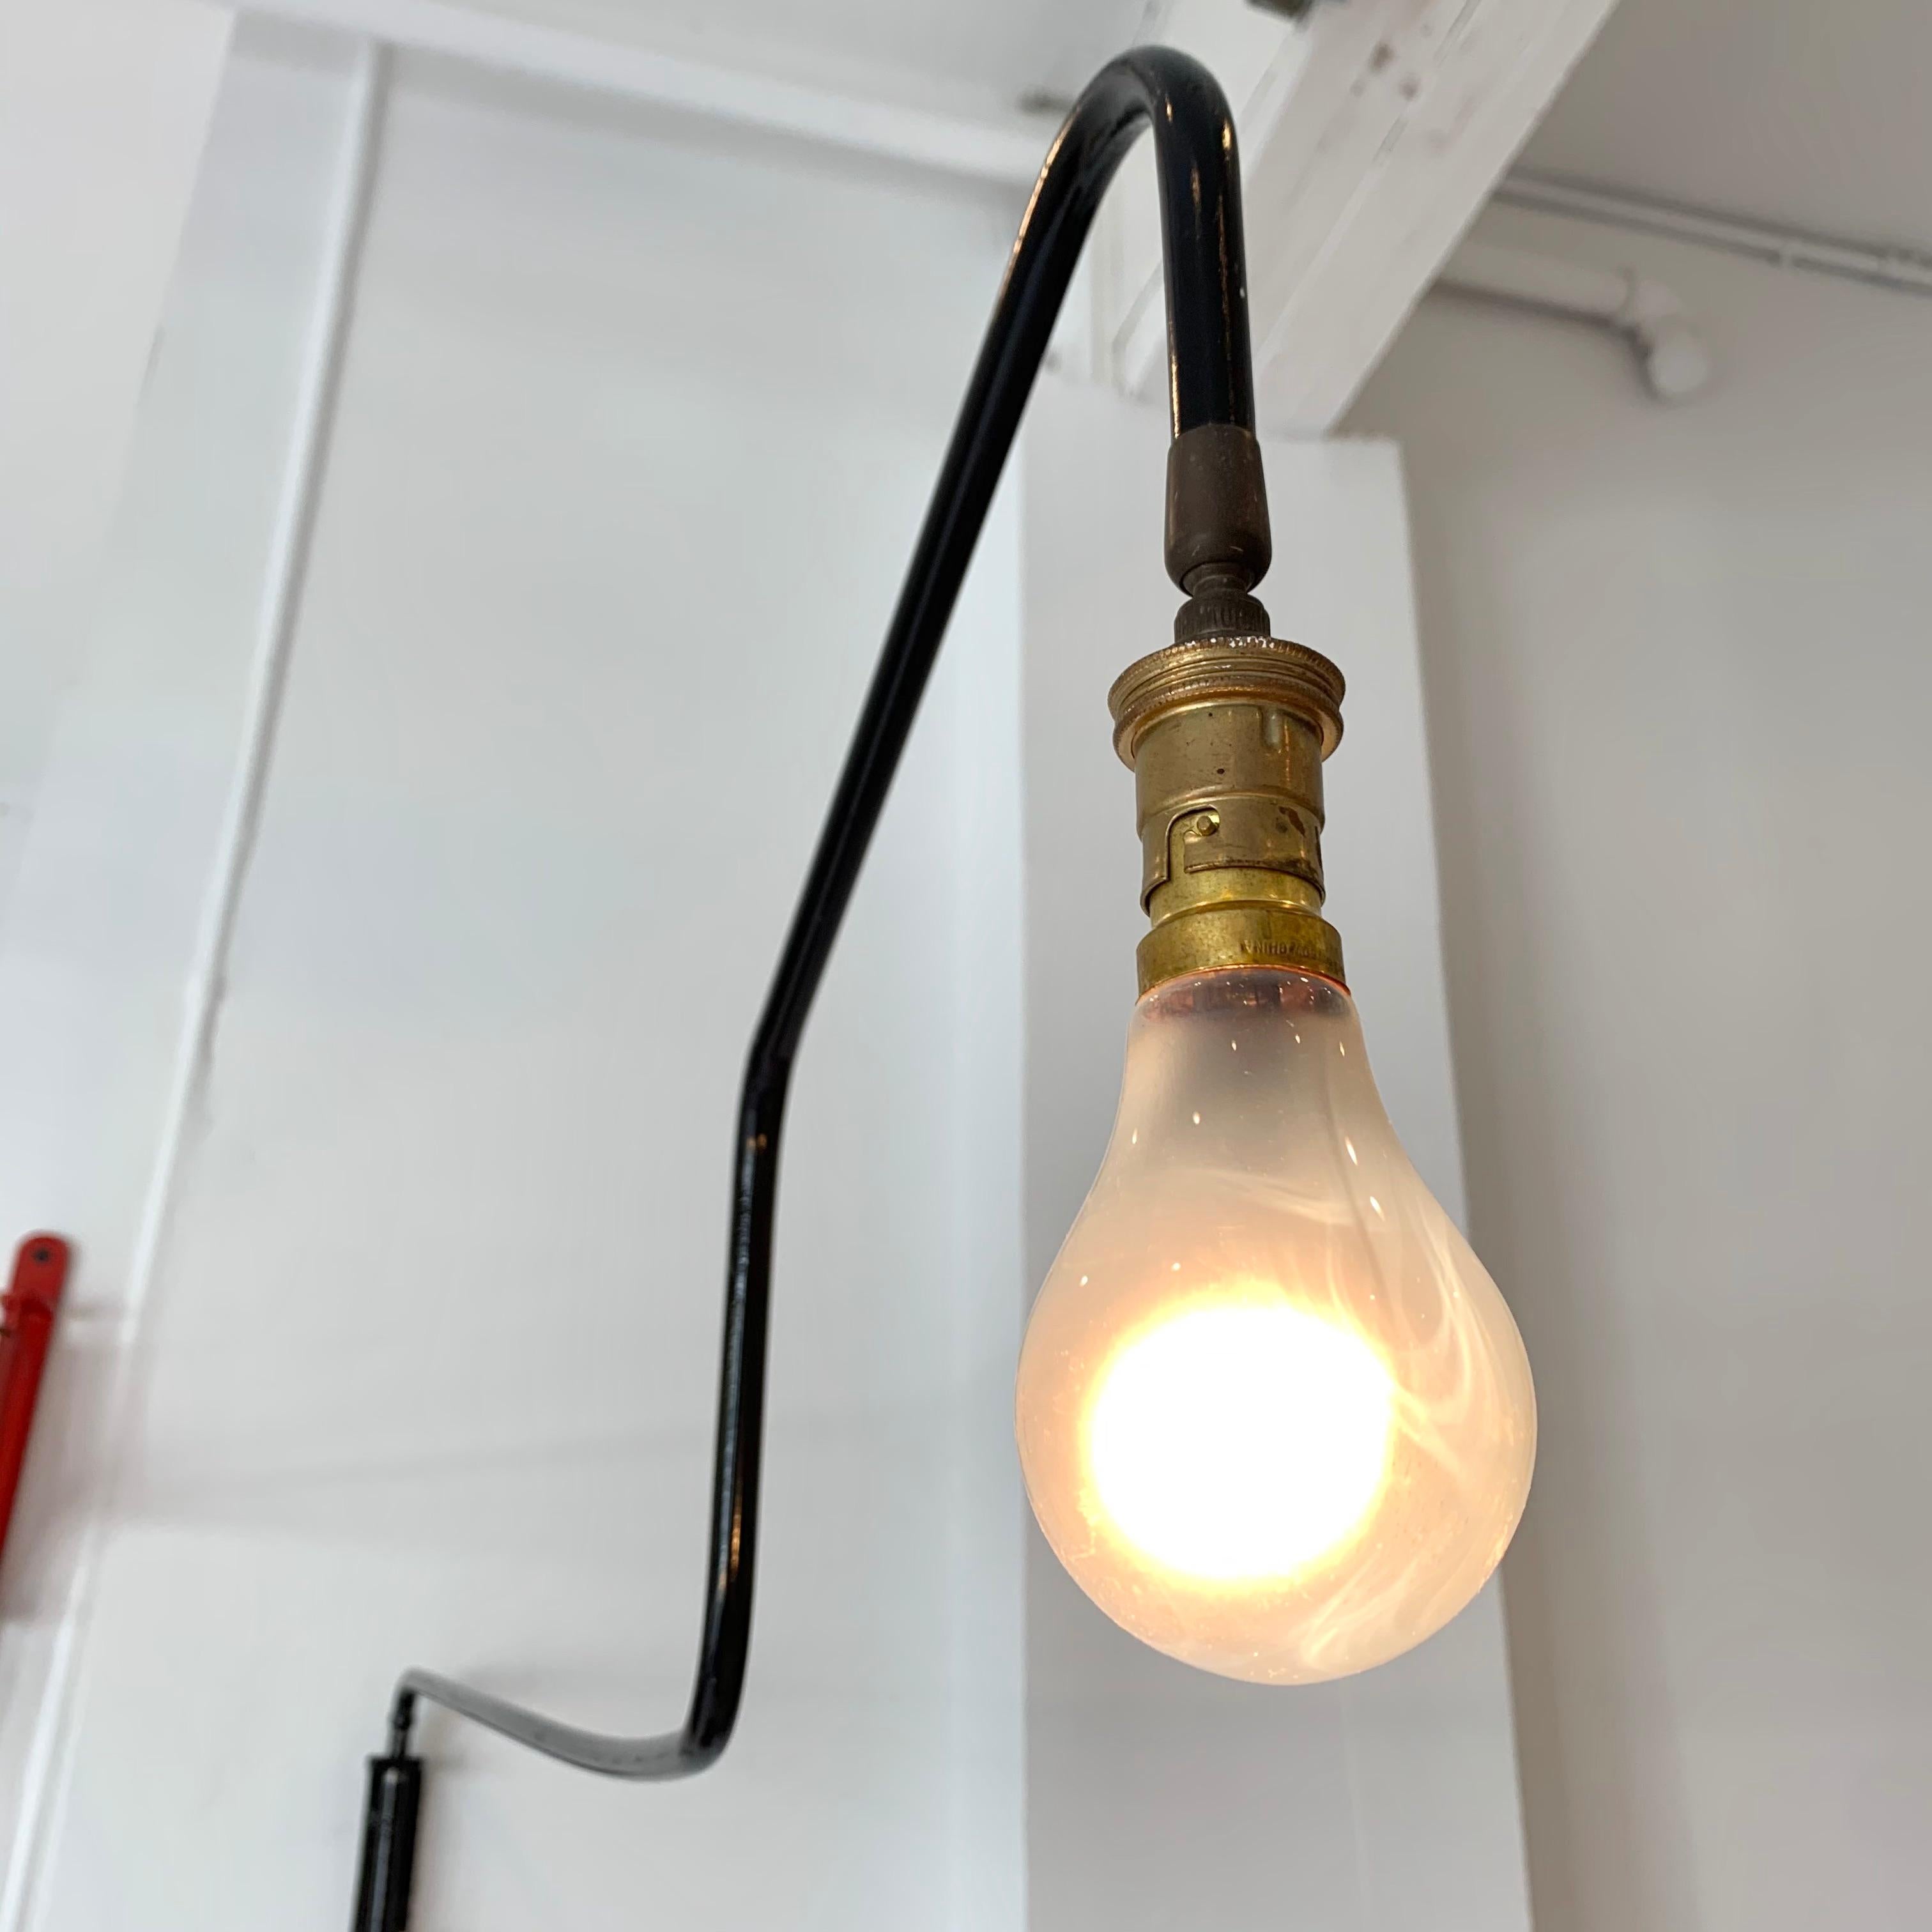 Mid-20th Century French Swing Arm Wall Light For Sale